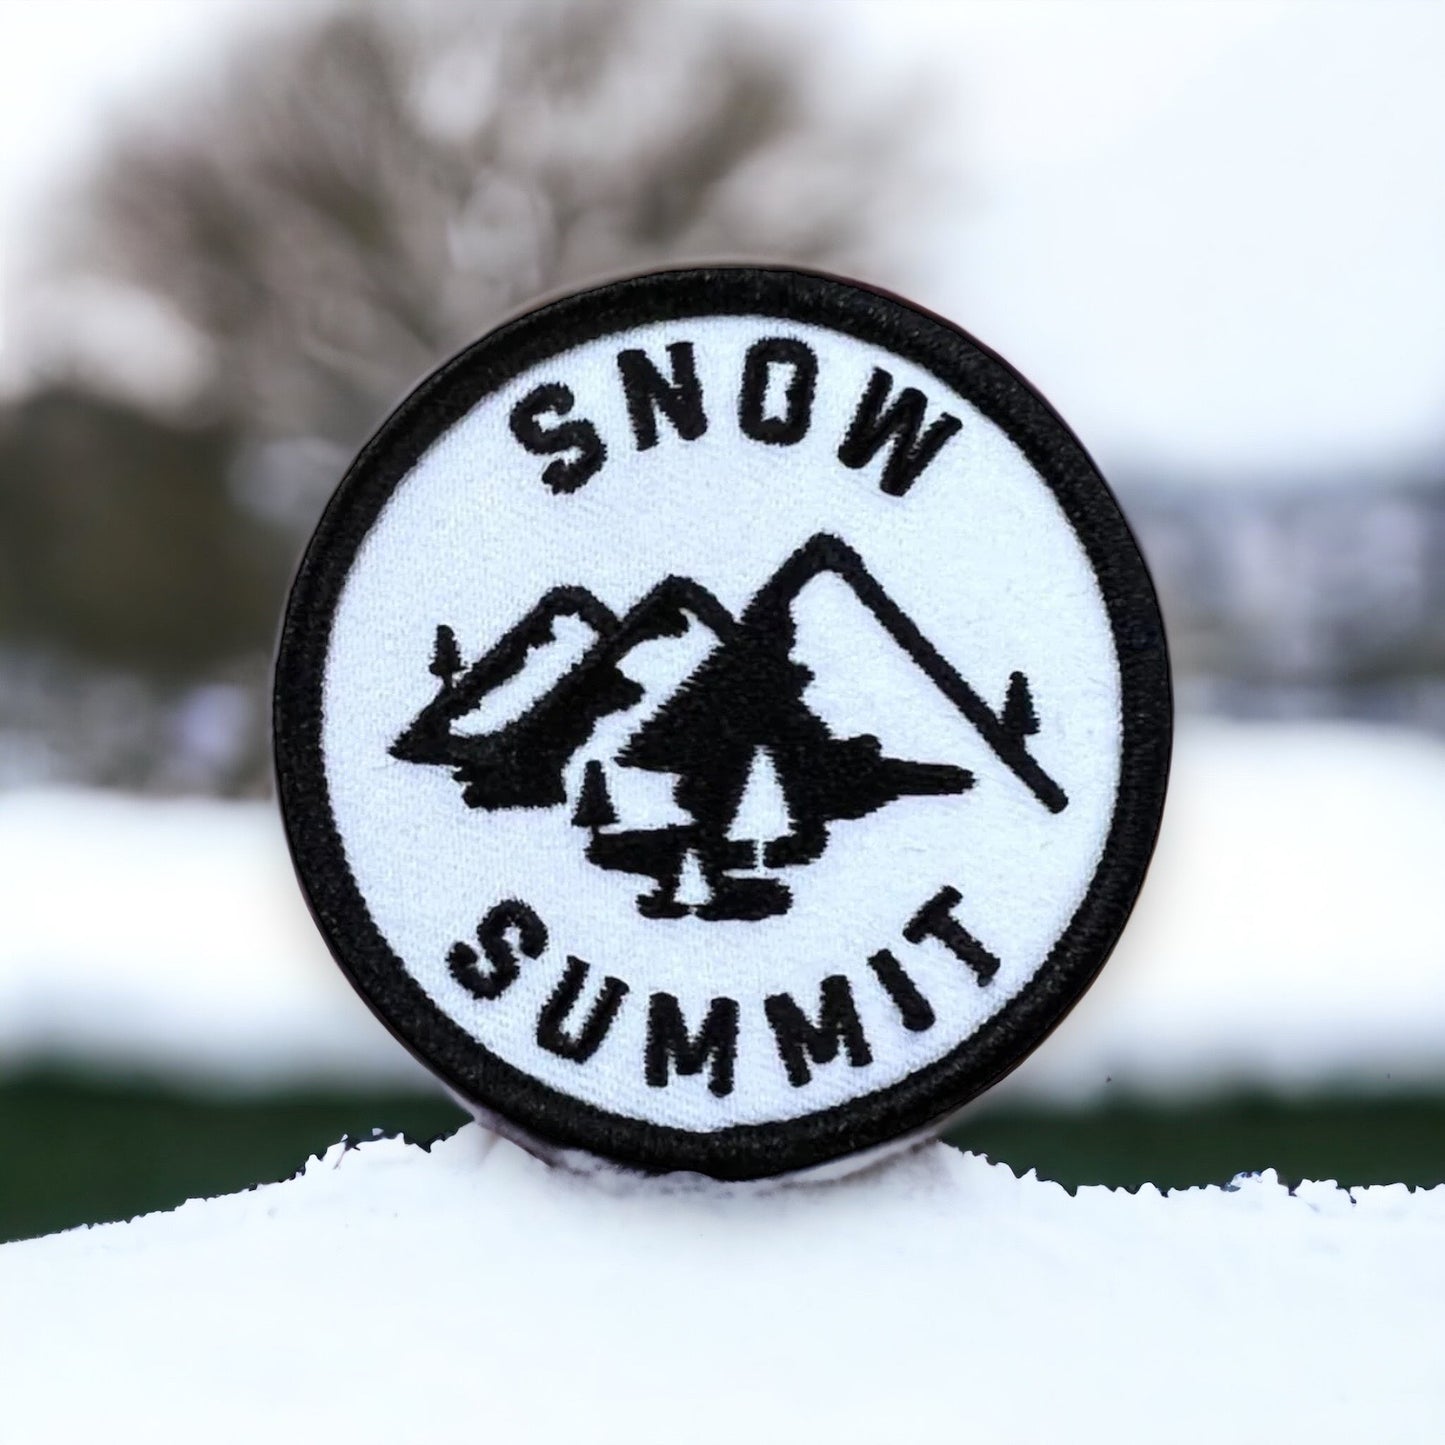 White patch with a snow summit logo and mountain stiched on it